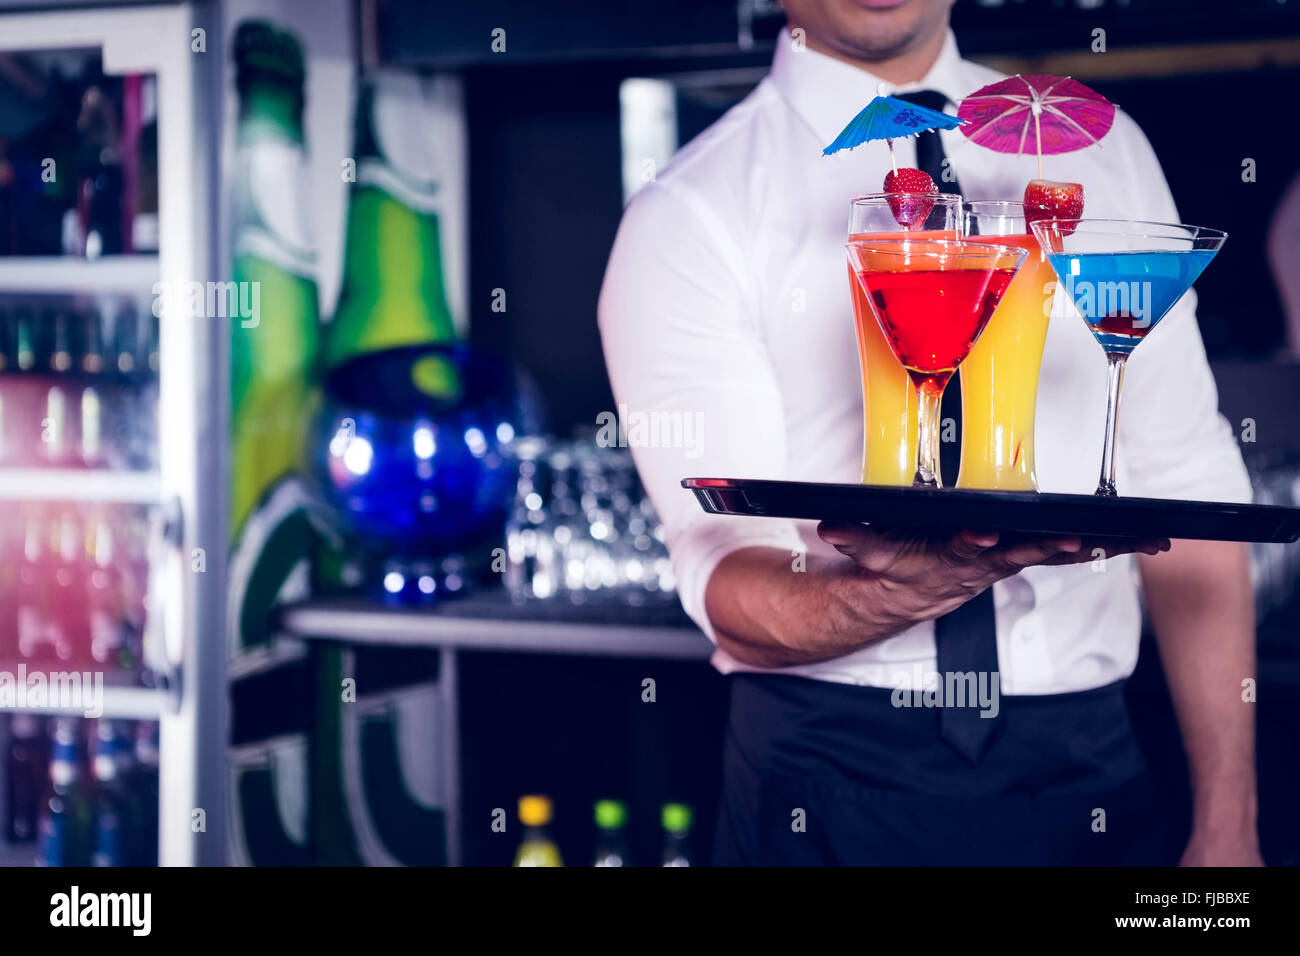 Mid section of bartender serving cocktail and martini Stock Photo